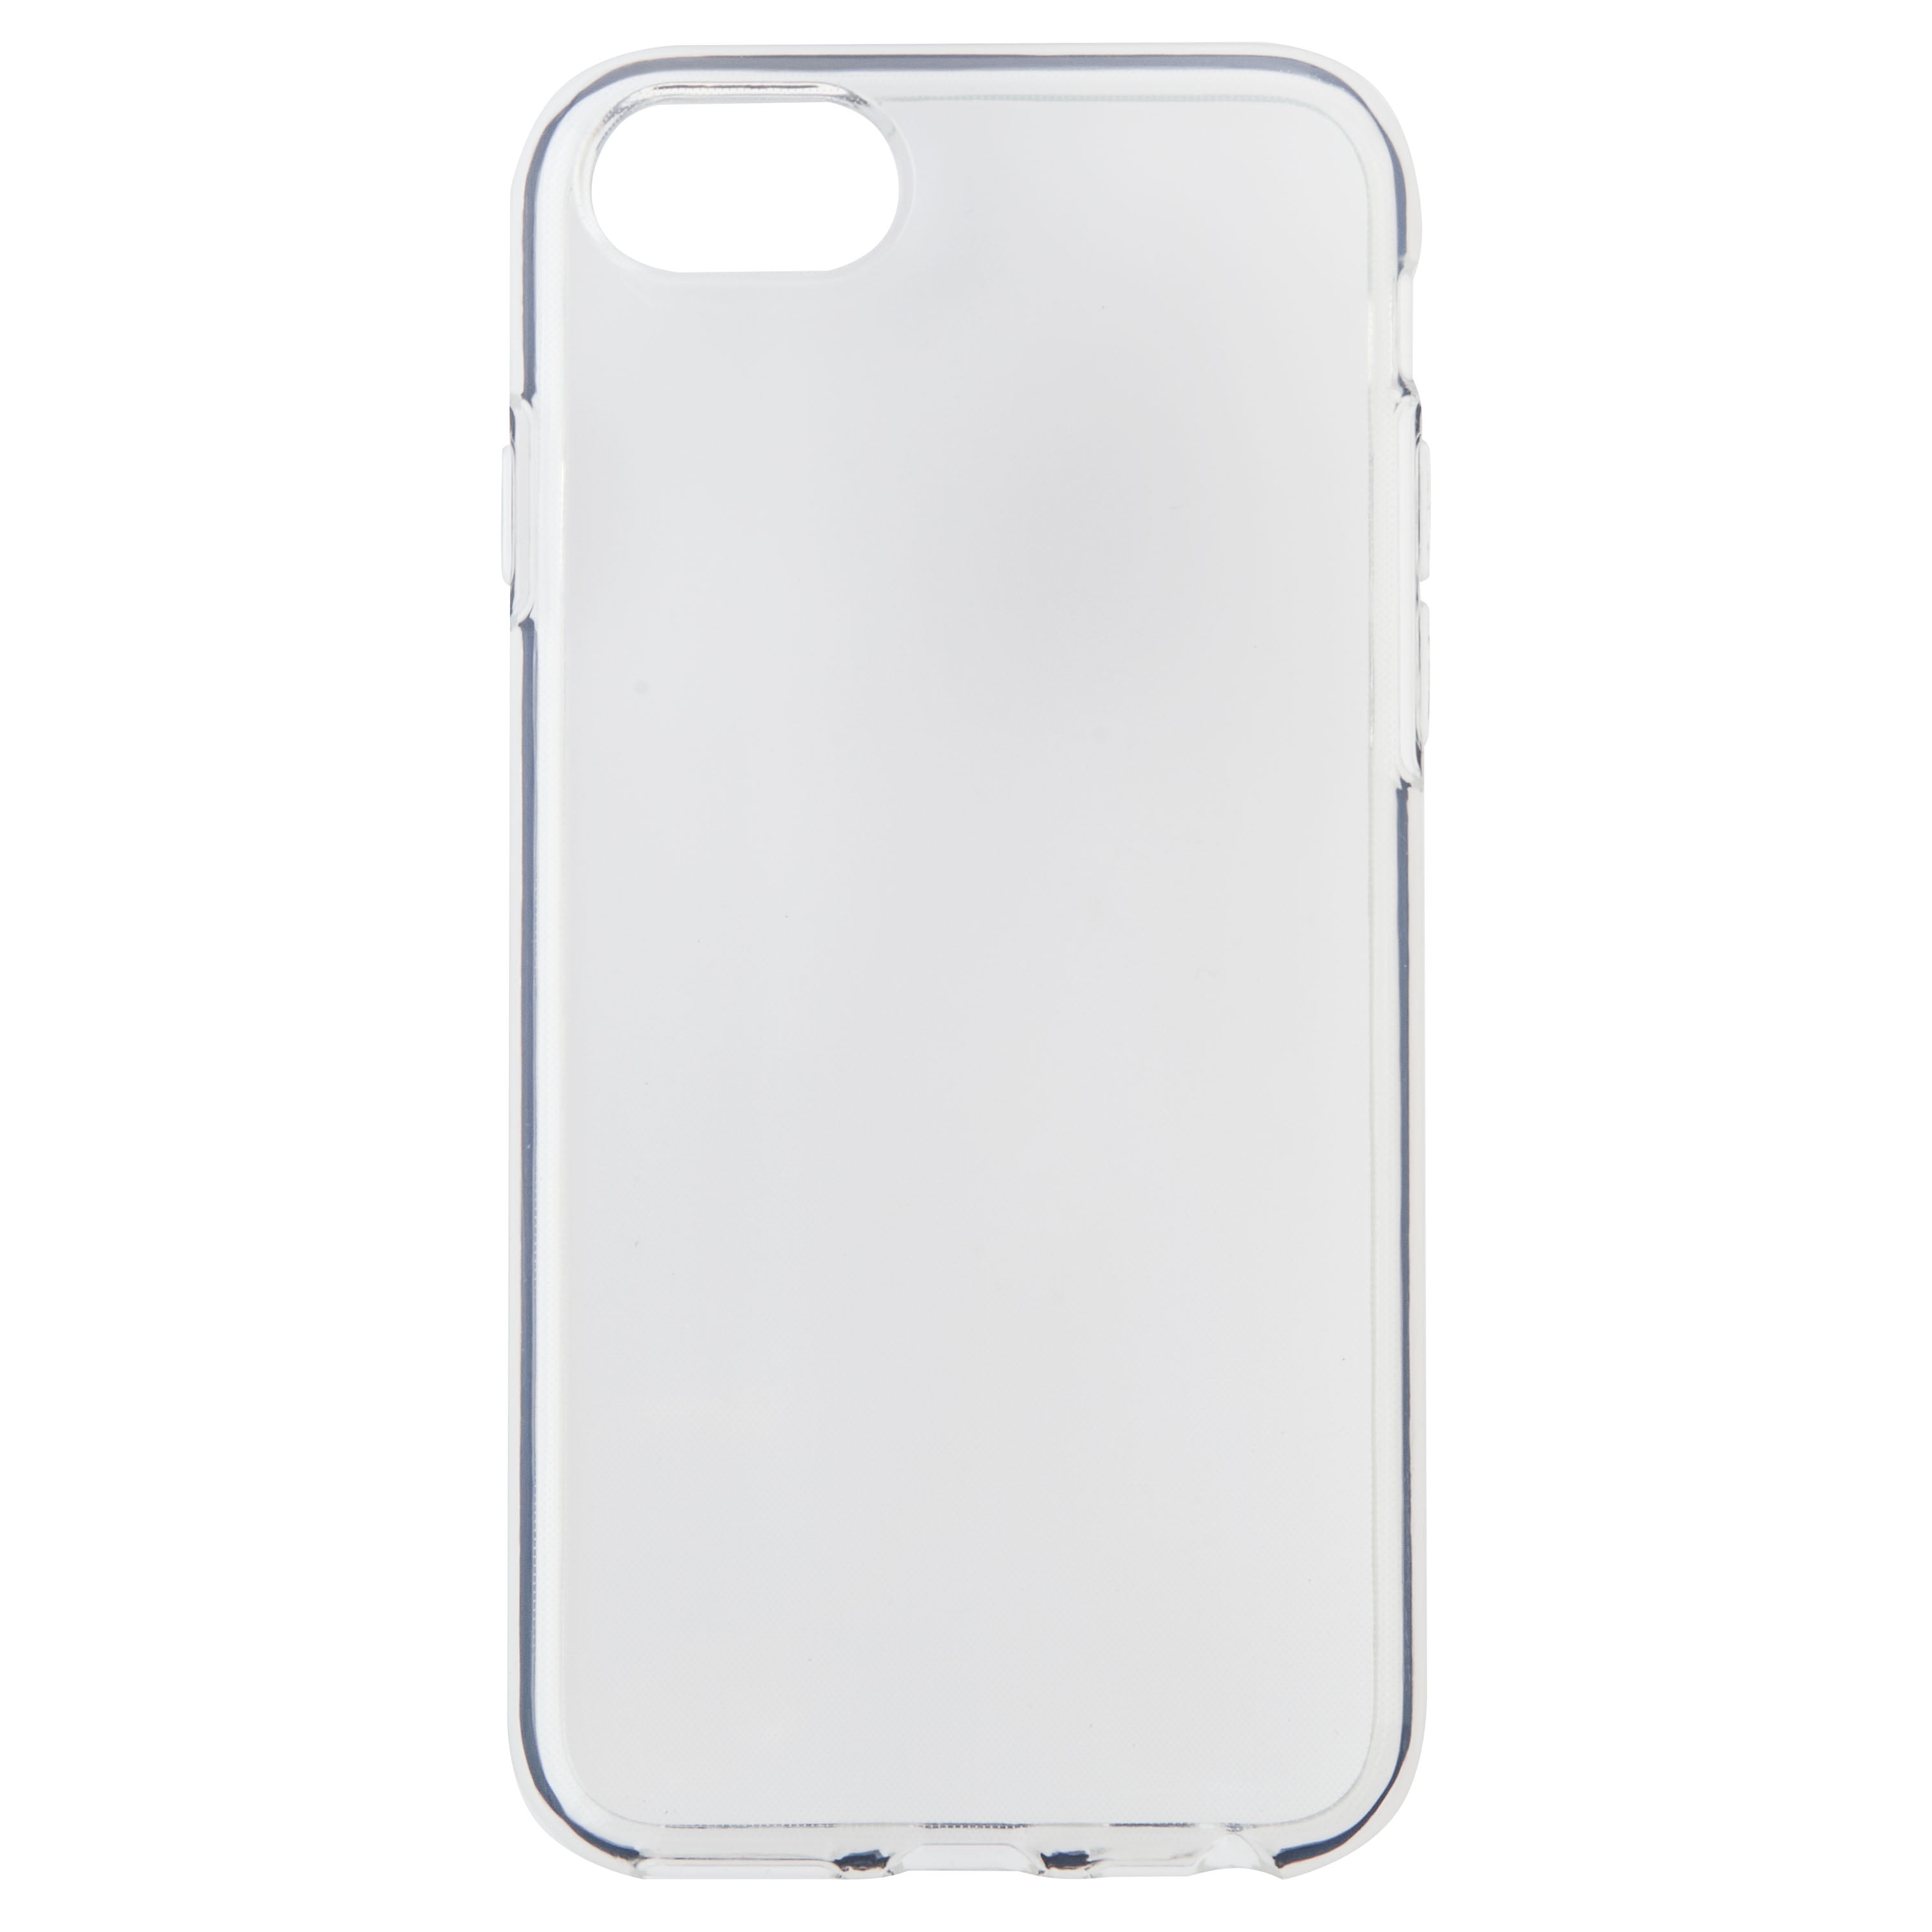 onn. Transparent TPU Phone Case for iPhone 4.7", Compatible with Apple iPhone 6/6s/7/8/SE (2020 and 2022), Slim and Scratch Resistant Phone Case